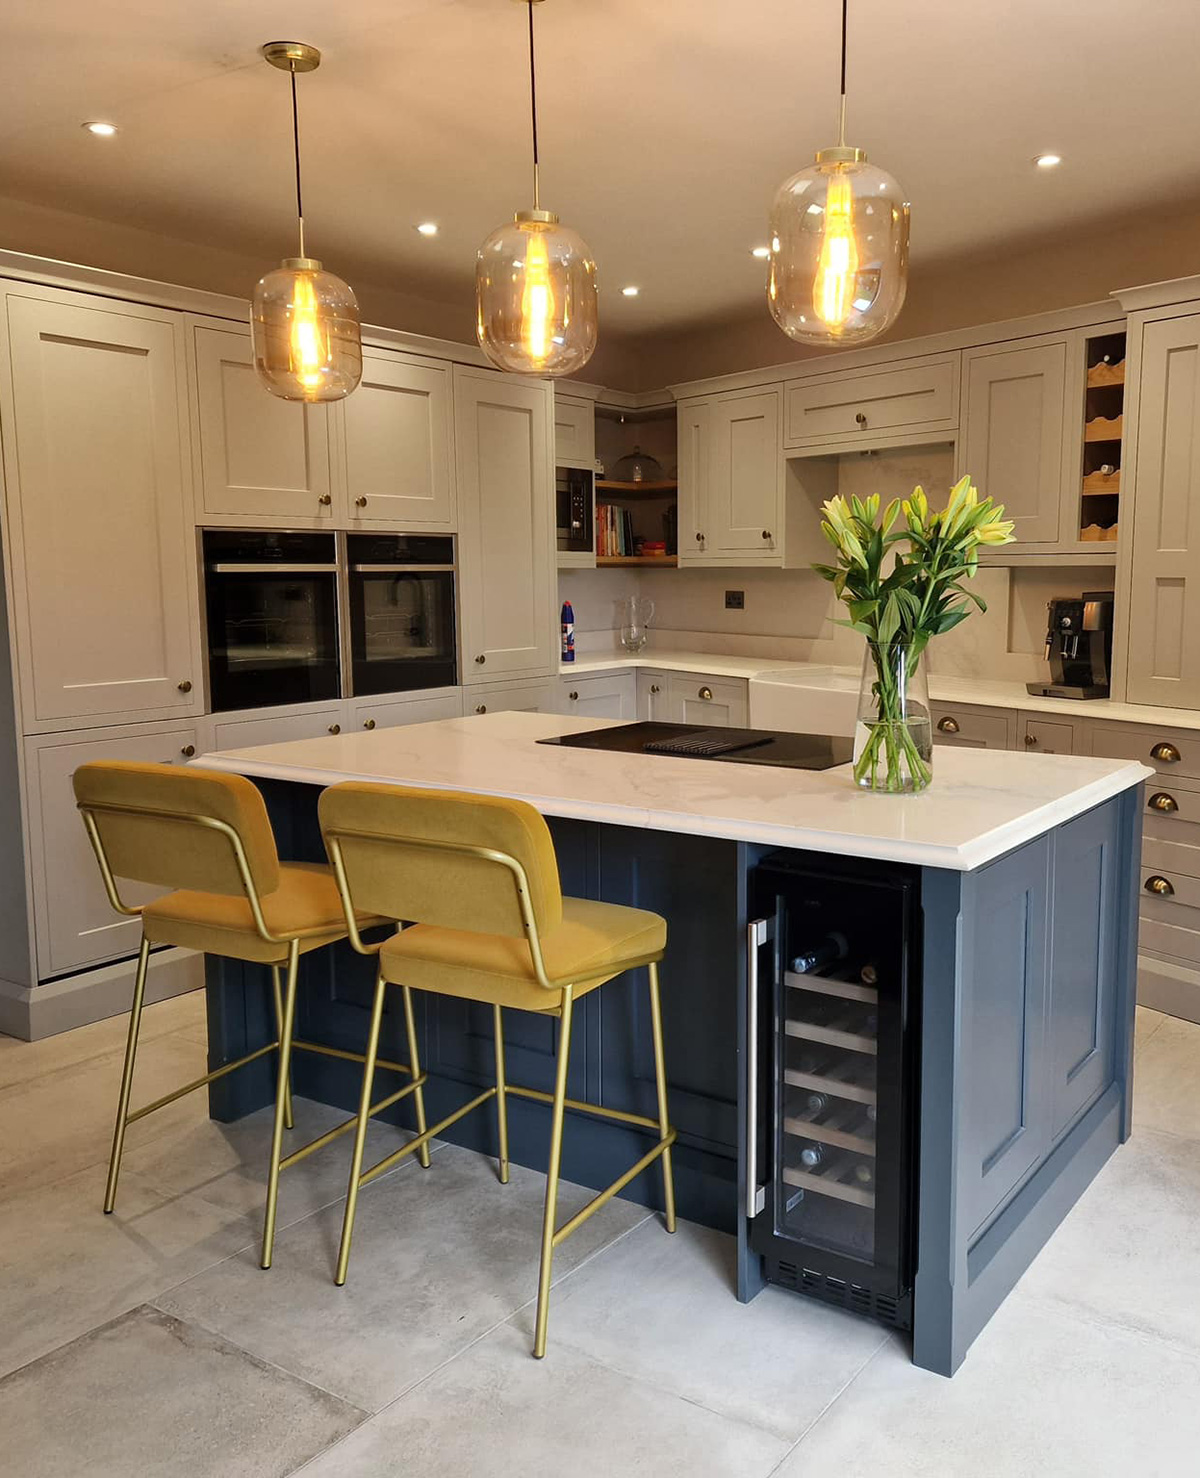 Kitchens and Bedrooms | Stockport, Cheshire